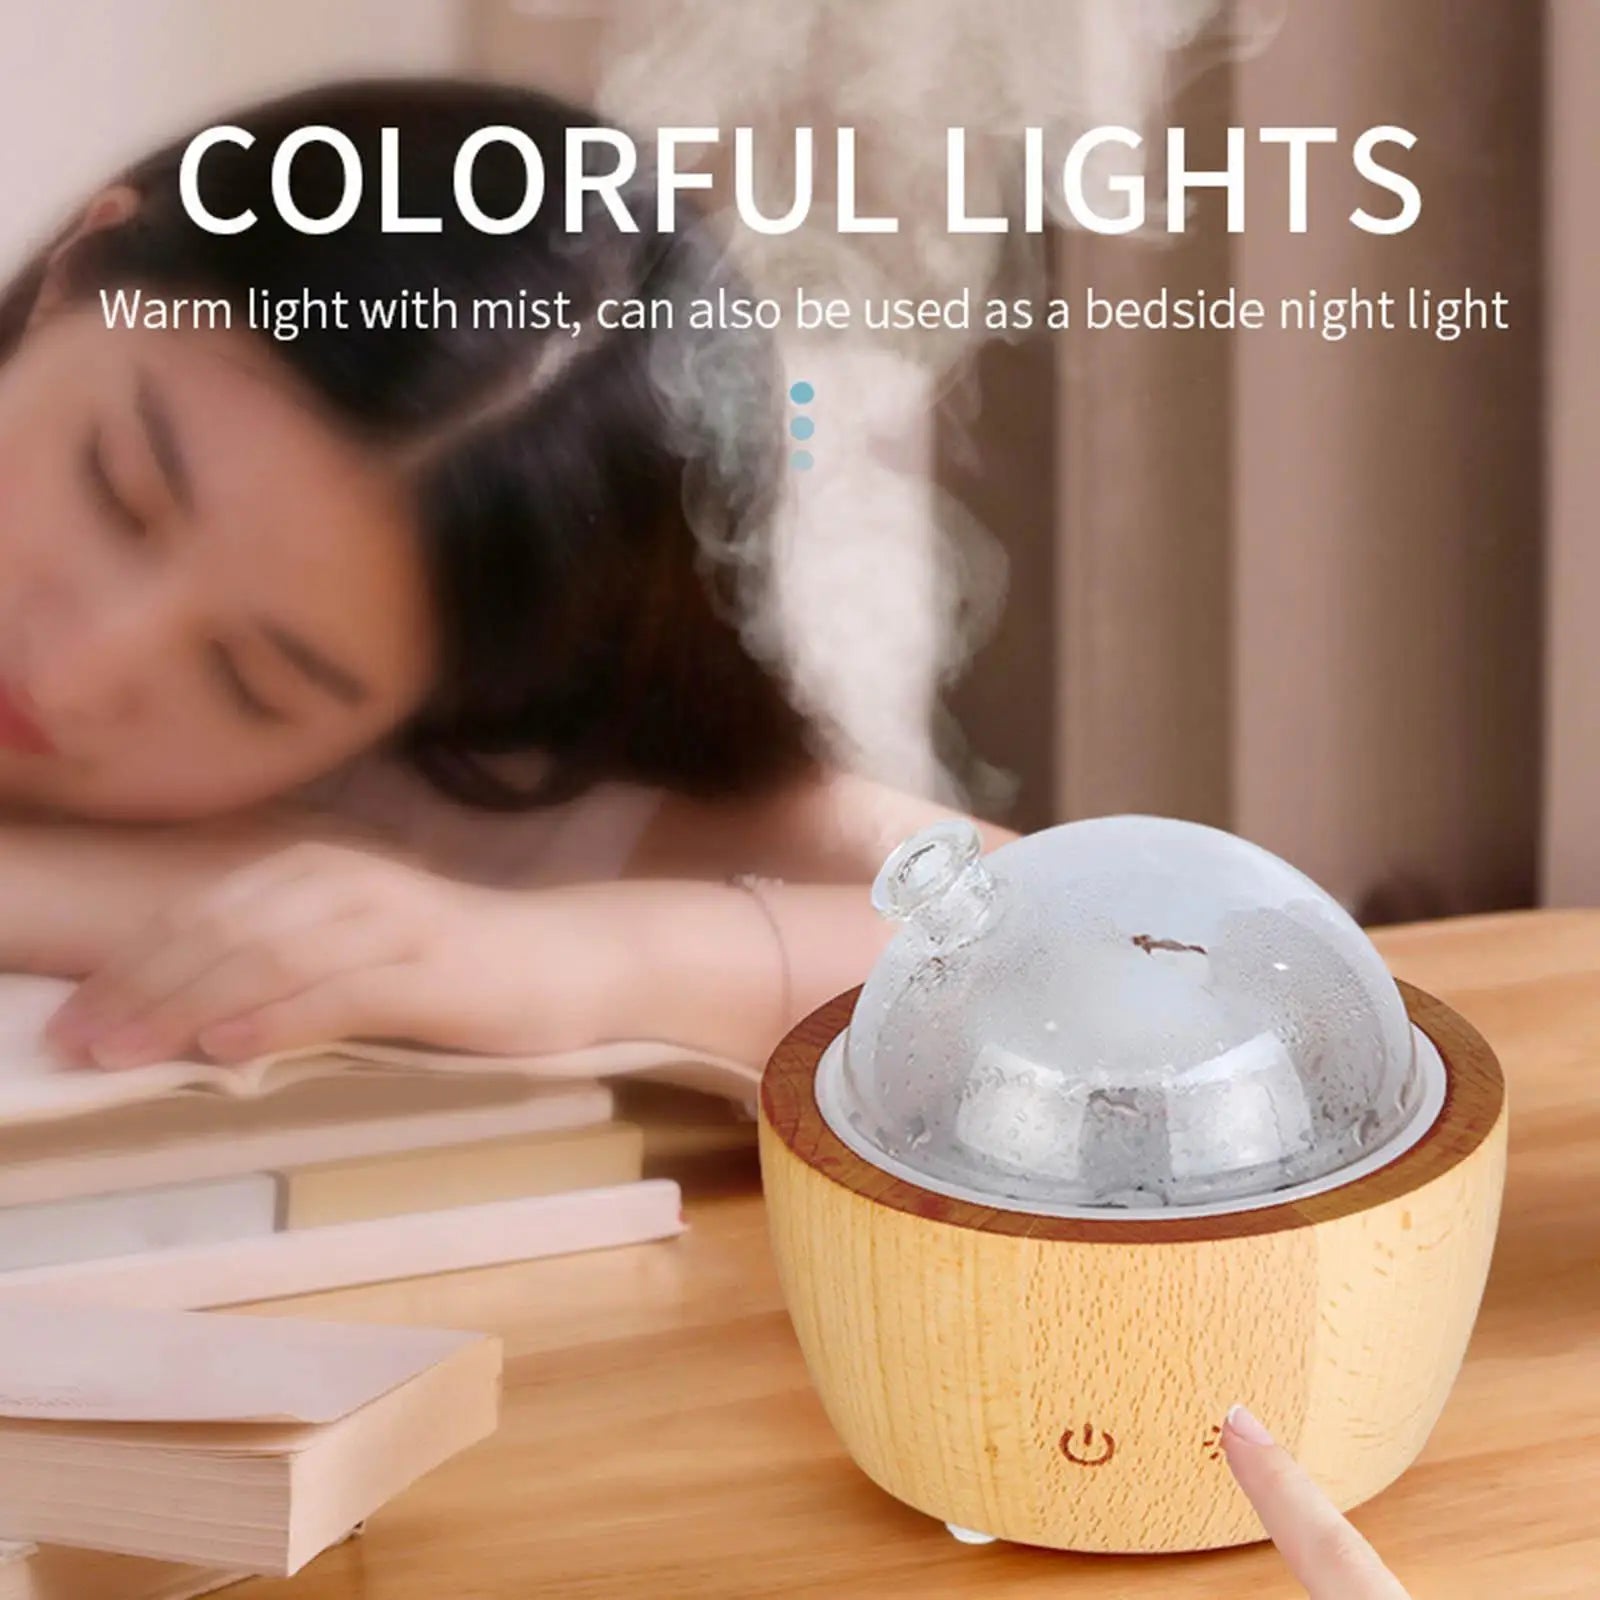 Glass Essential Oil Diffuser Humidifier Sprayer Portable Home Bedroom Large Room Fragrance Perfumes Diffuser for Yoga Office ShopOnlyDeal